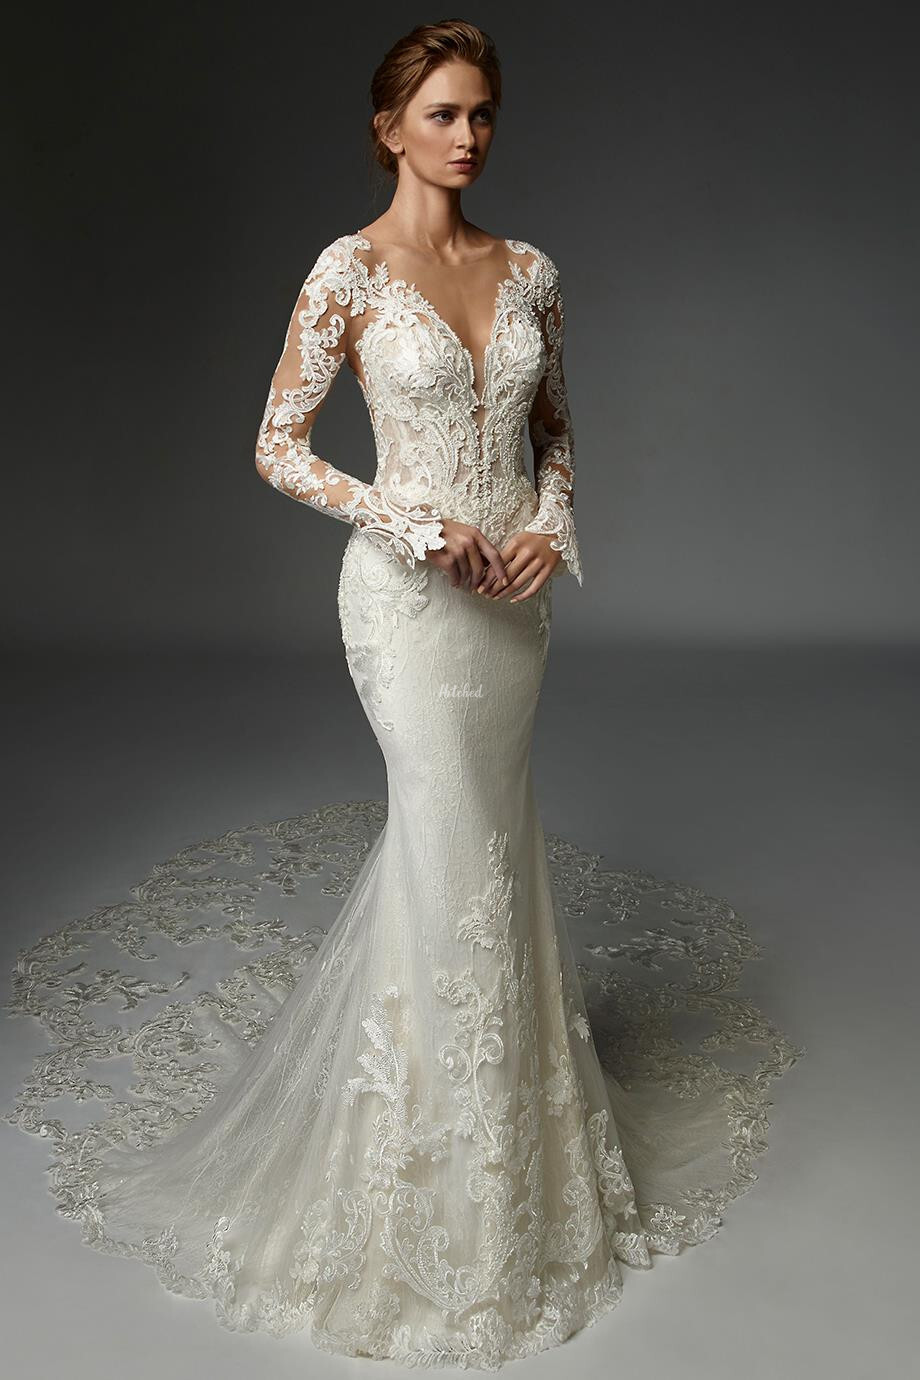 Noor Wedding Dress from ELYSEE - hitched.co.uk